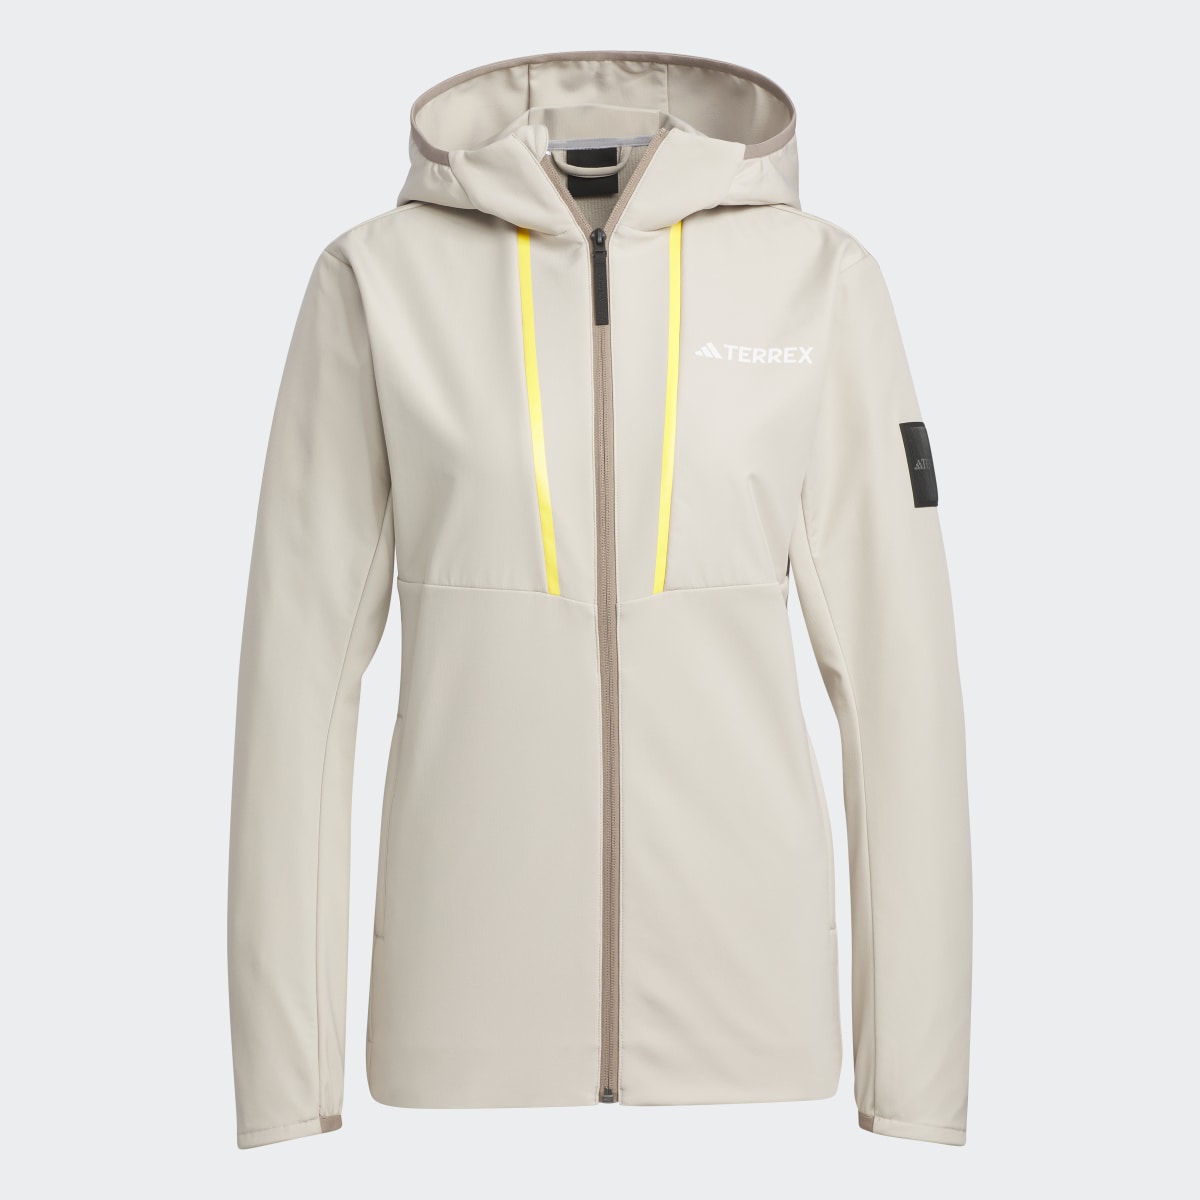 Adidas Veste soft shell National Geographic. 5